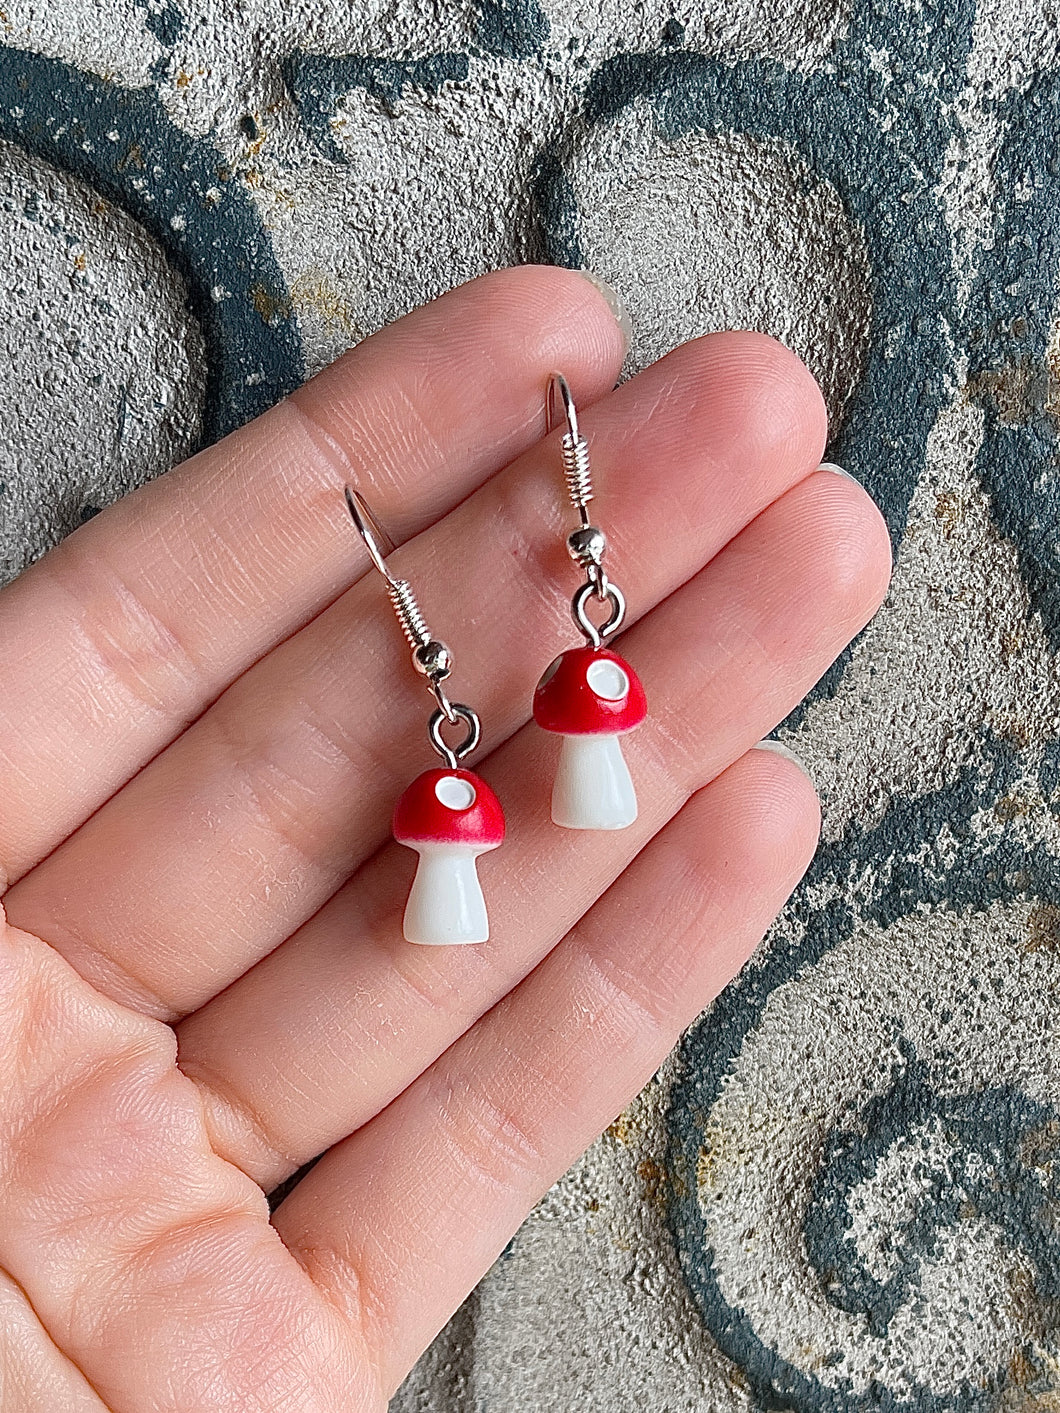 Mushroom Earrings/ Cottagecore Accessories/ Fairy Jewelry/ Unique Quirky Food Dangle Gift Active